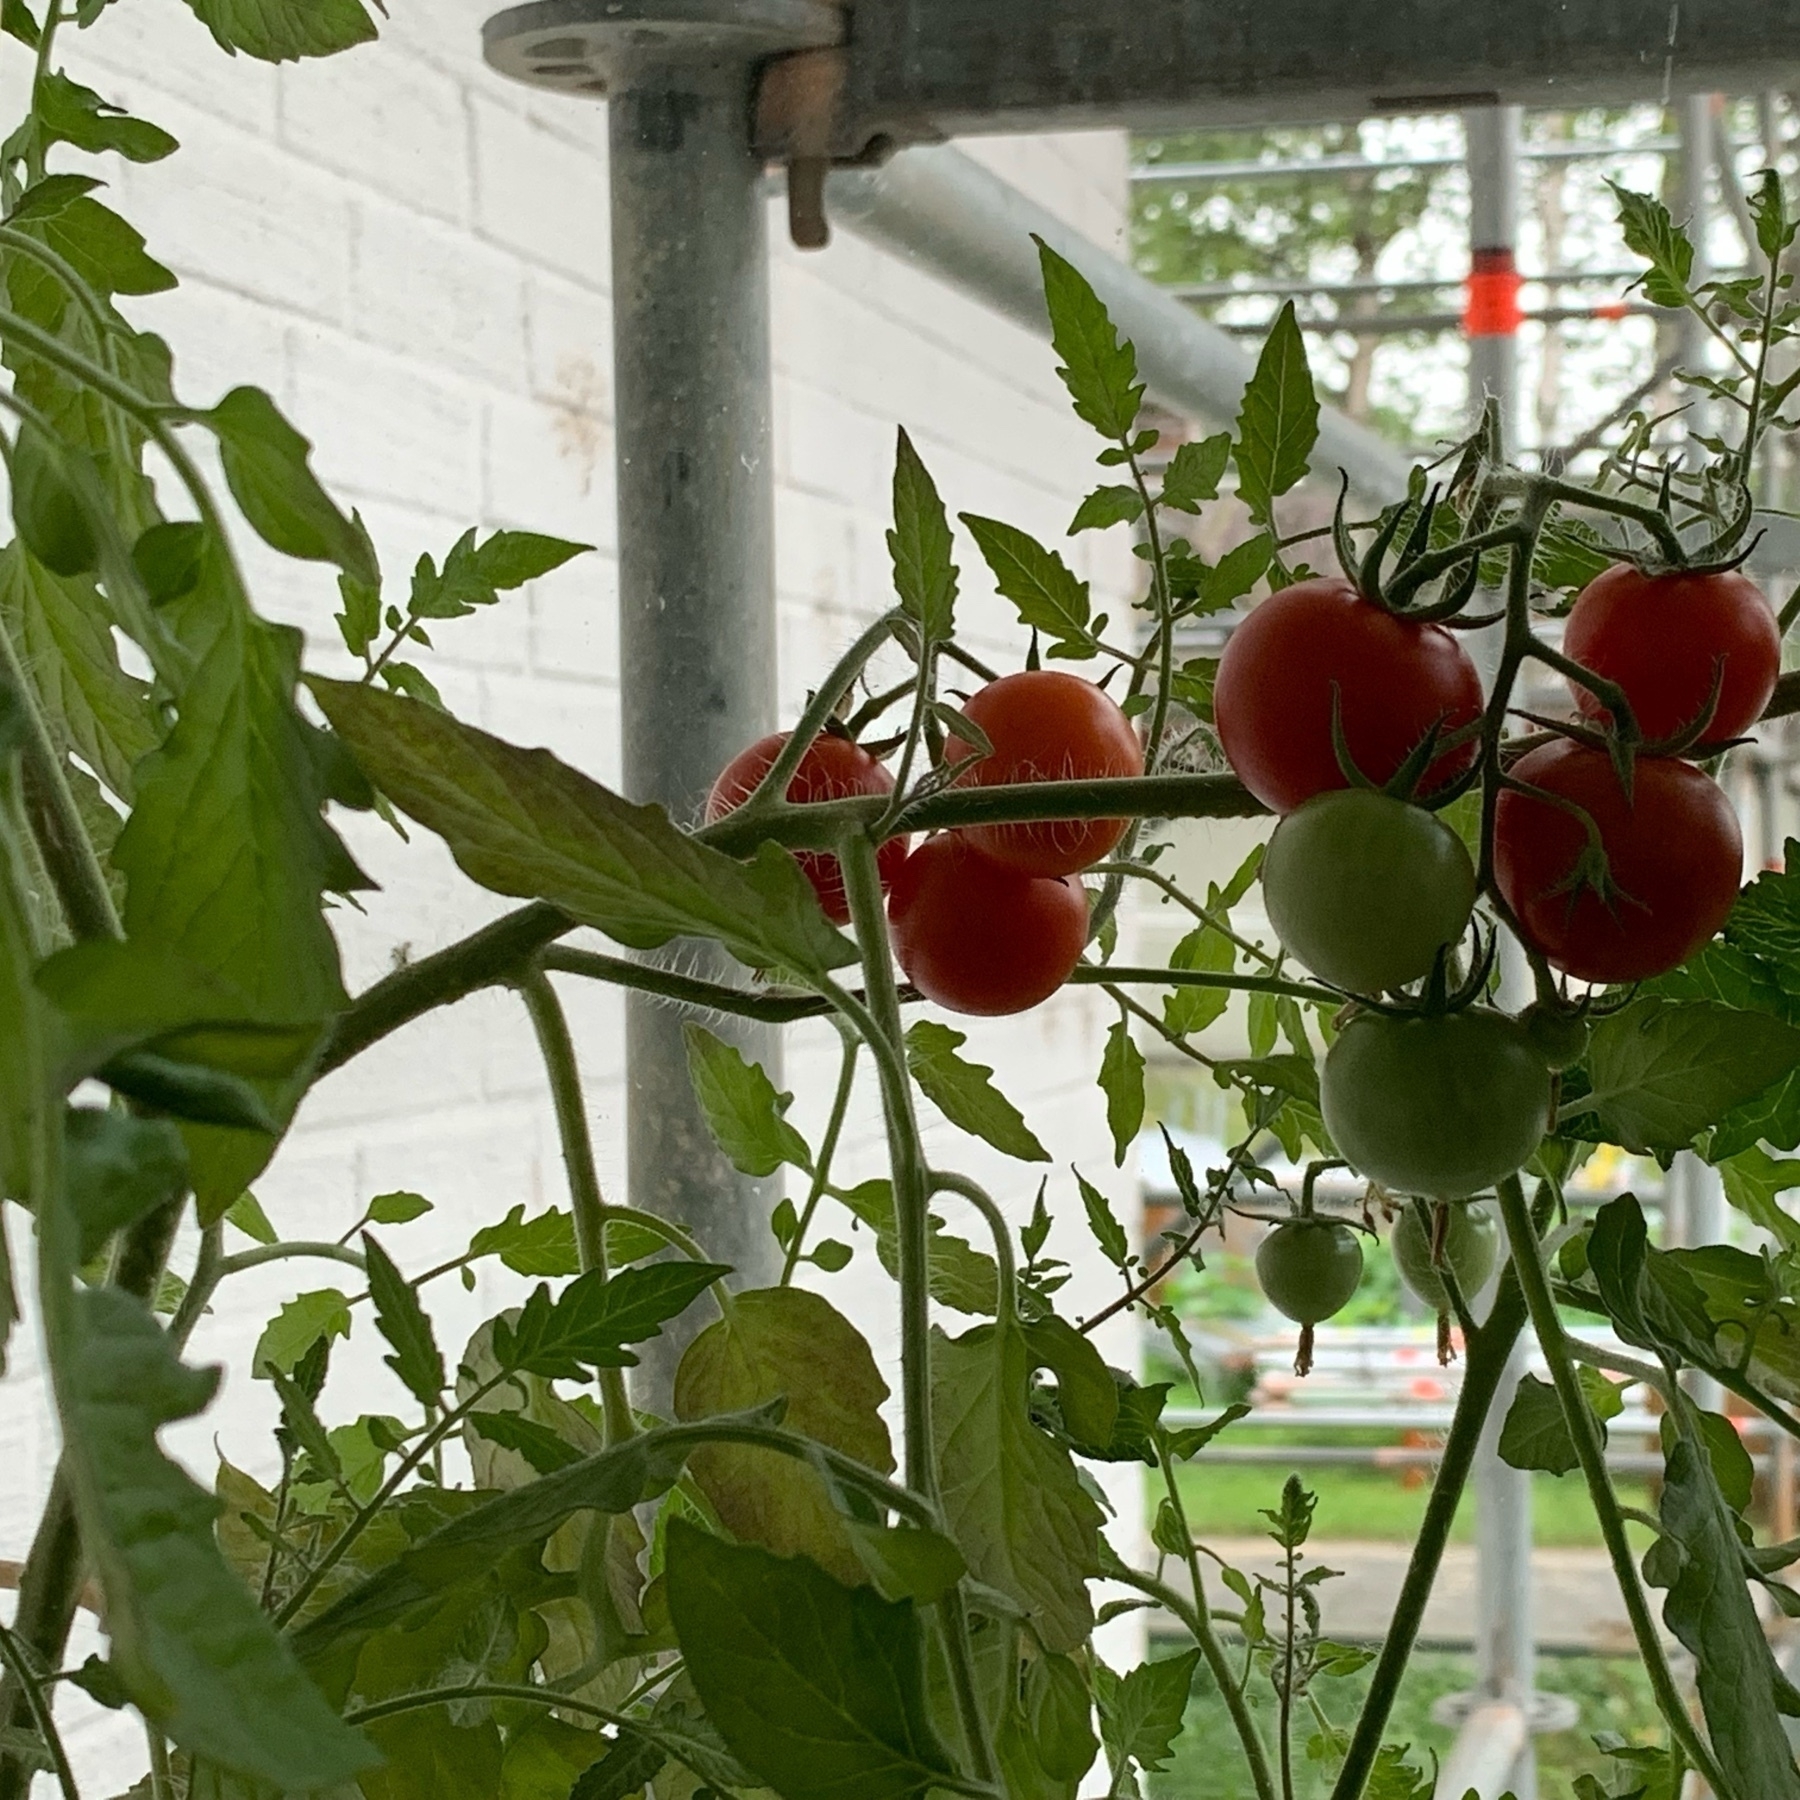 Tomato fruits still on the bush on our balcony with the scaffolding in the background.